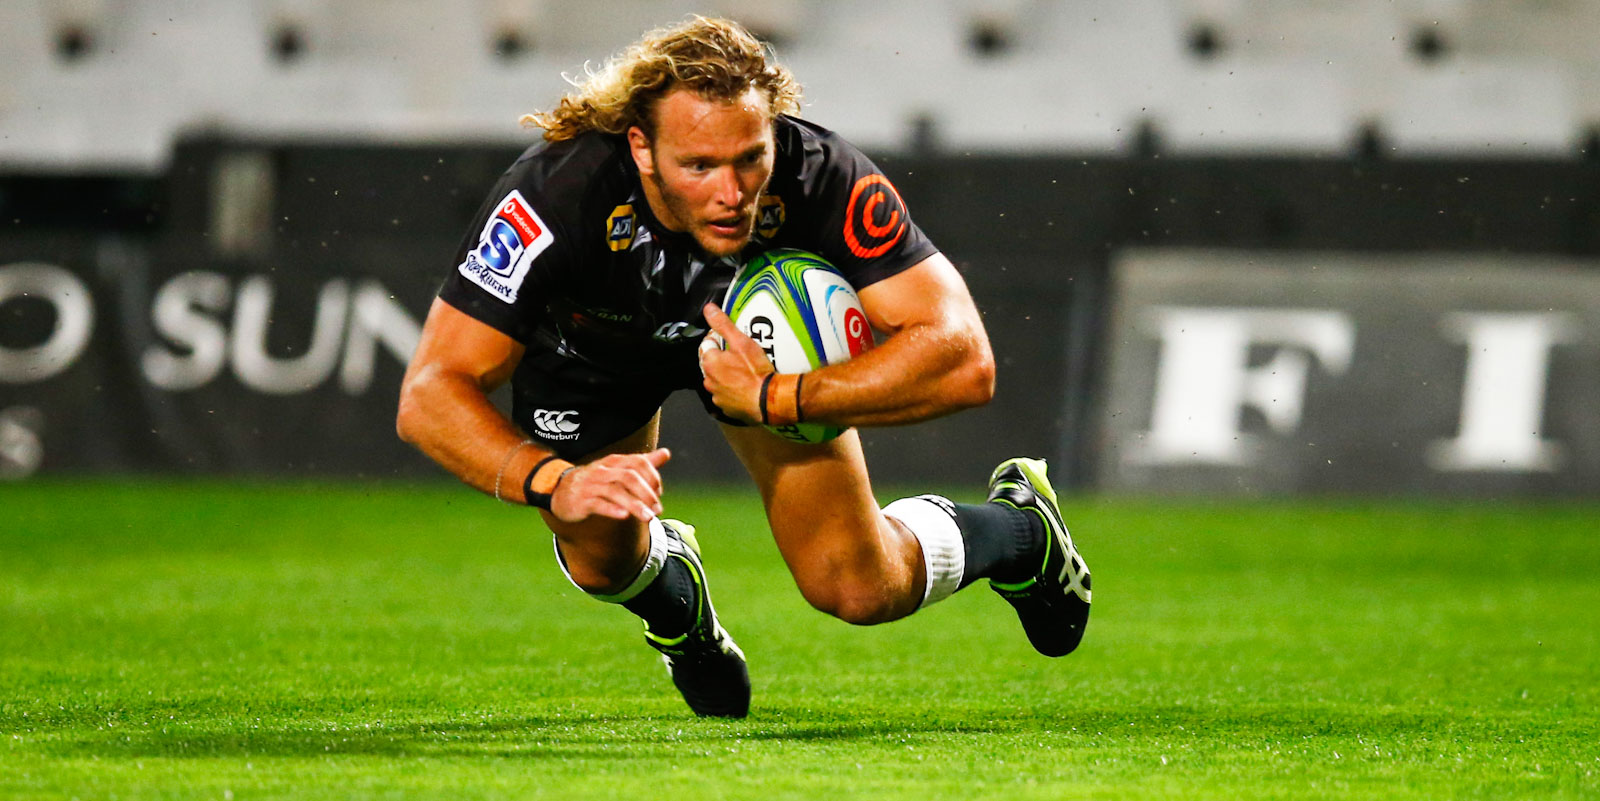 Werner Kok scored the Cell C Sharks' only try